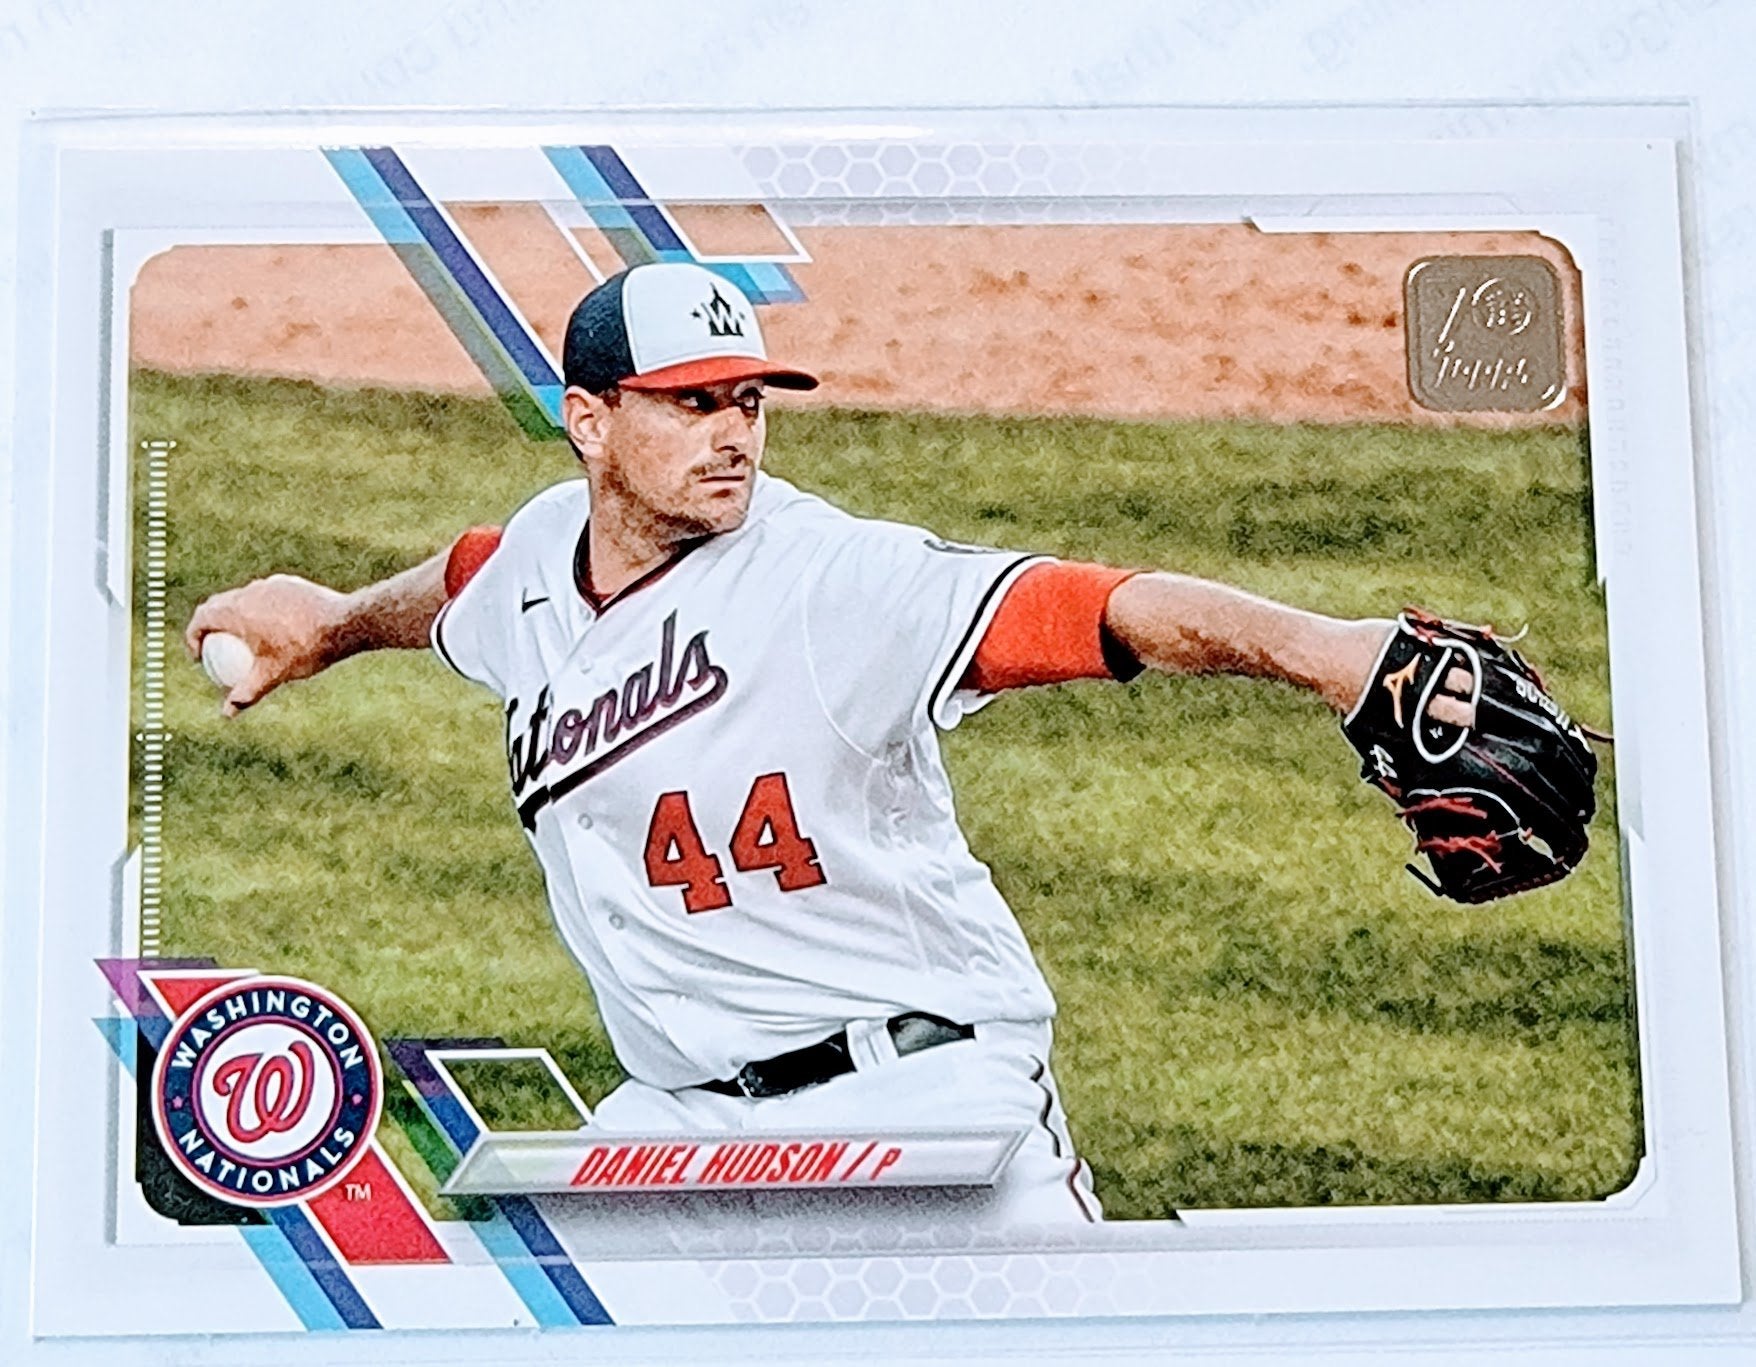 2021 Topps Update Daniel Hudson Baseball Trading Card SMCB1 simple Xclusive Collectibles   